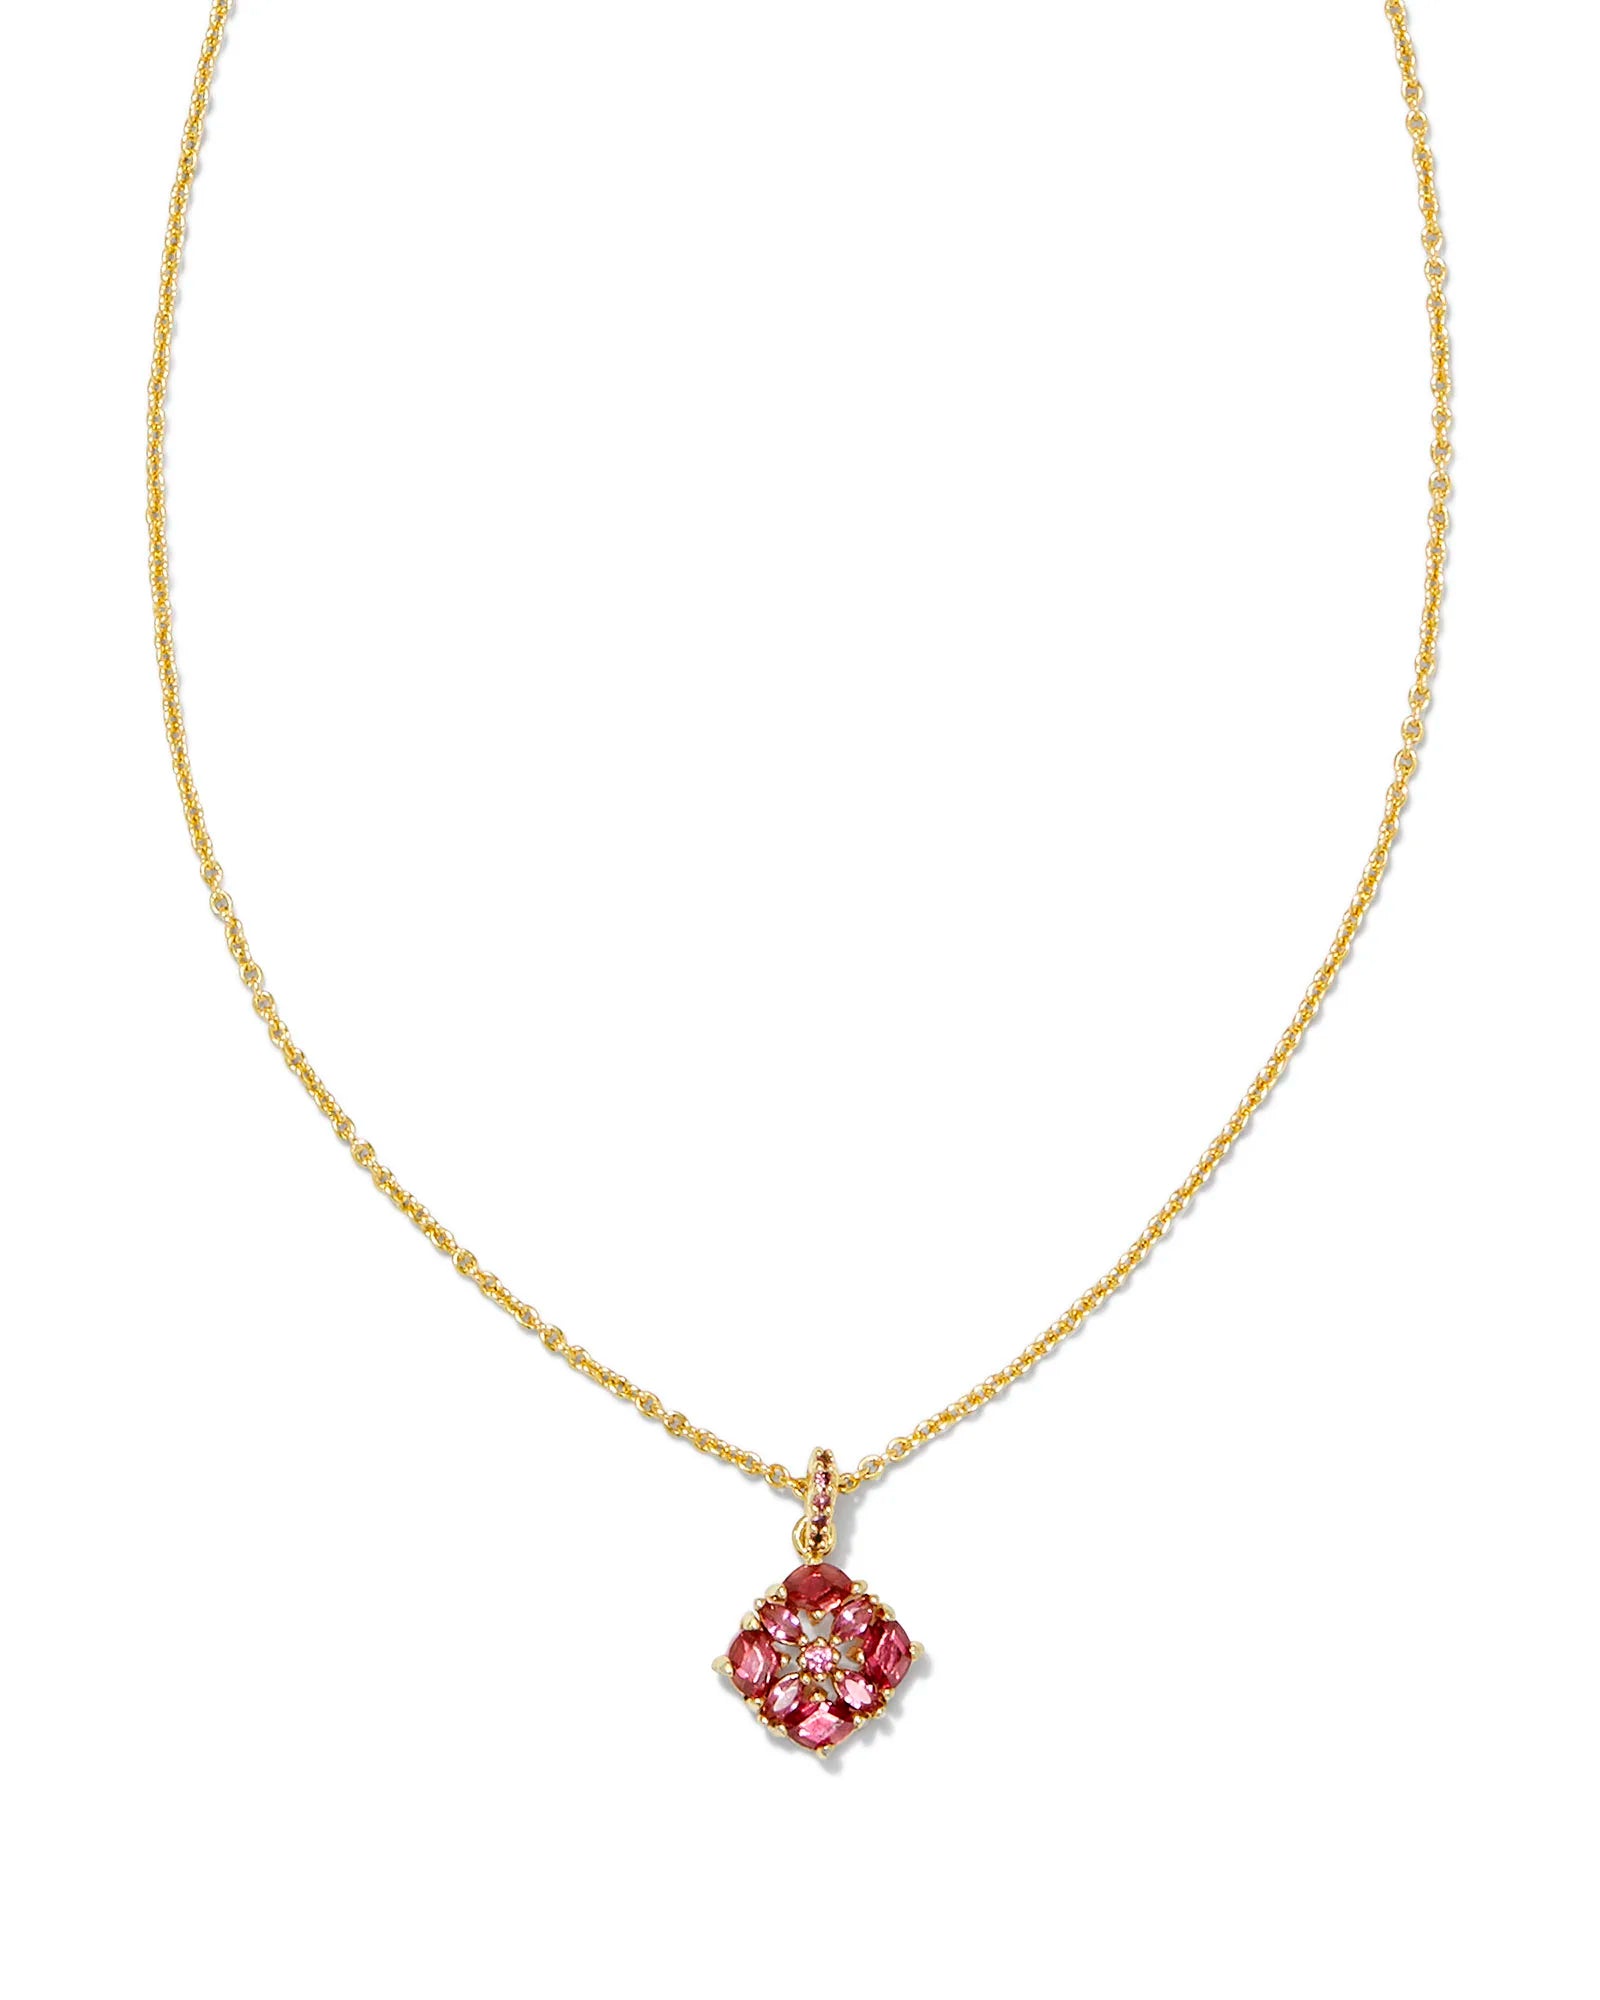 Kendra Scott Dira Crystal Short Pendant Necklace Gold Pink Mix-Necklaces-Kendra Scott-N00469GLD-The Twisted Chandelier